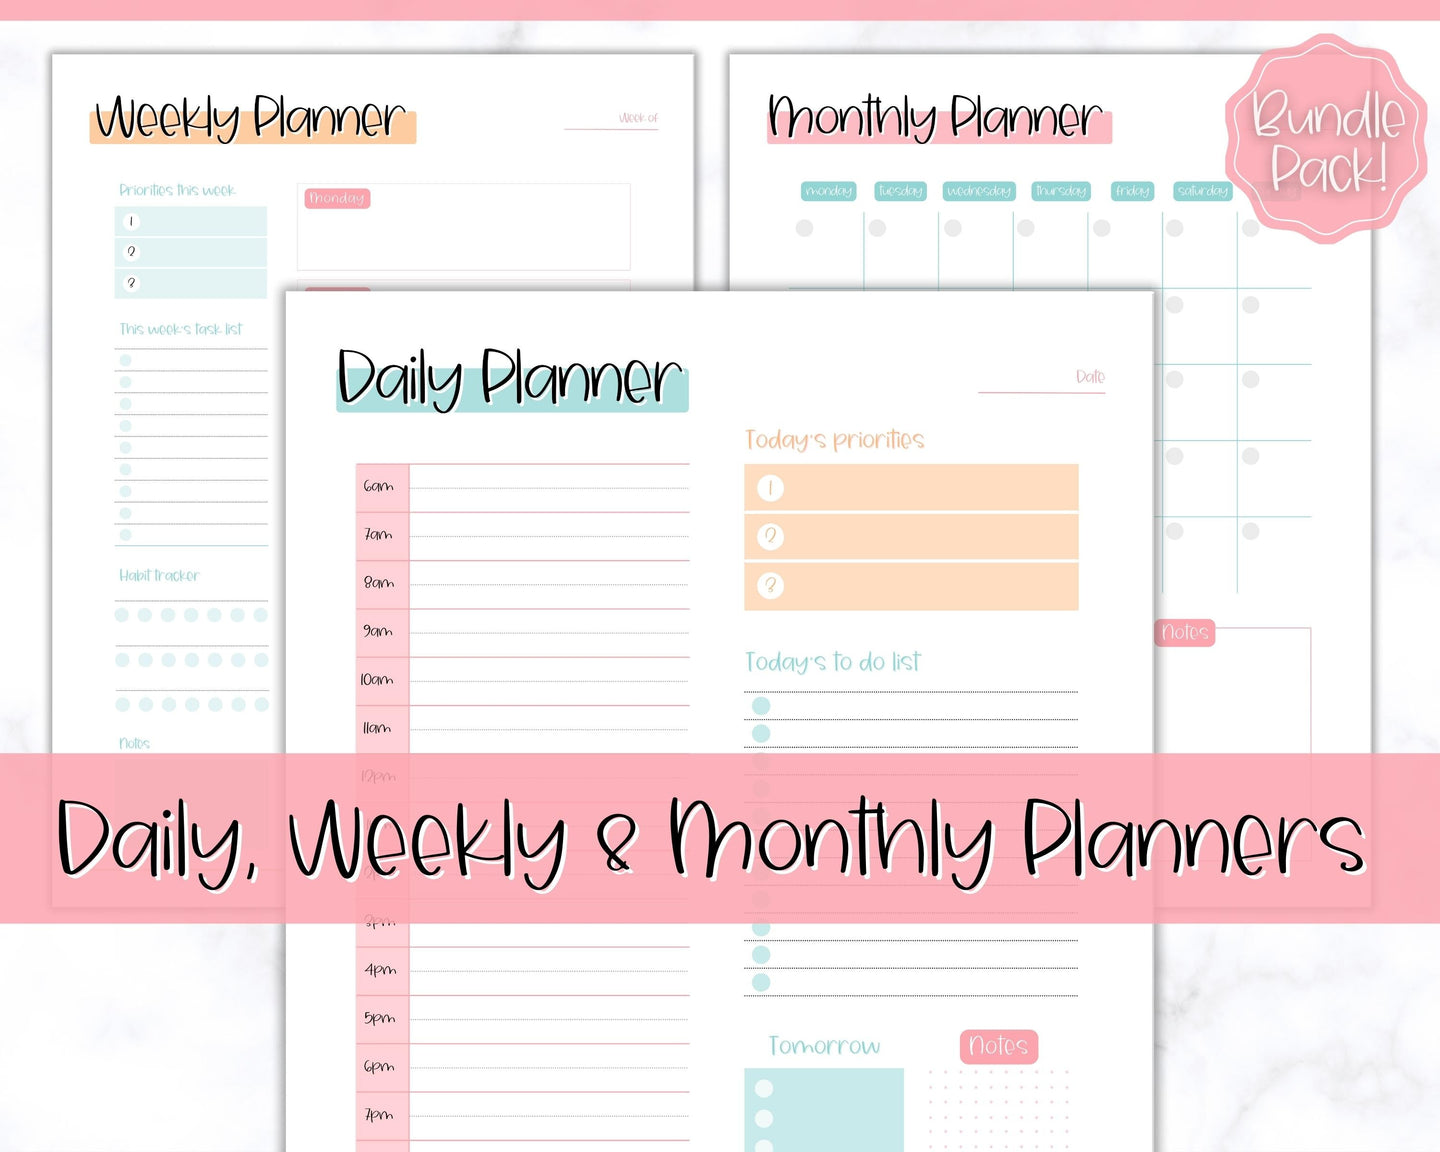 Daily Planner, Weekly Planner, Monthly Planner Printable PACK! Digital Planner Insert Sets, To do List, Productivity, Work Day, Hourly, A4 A5 Letter, iPad, Goodnotes - Colorful Sky